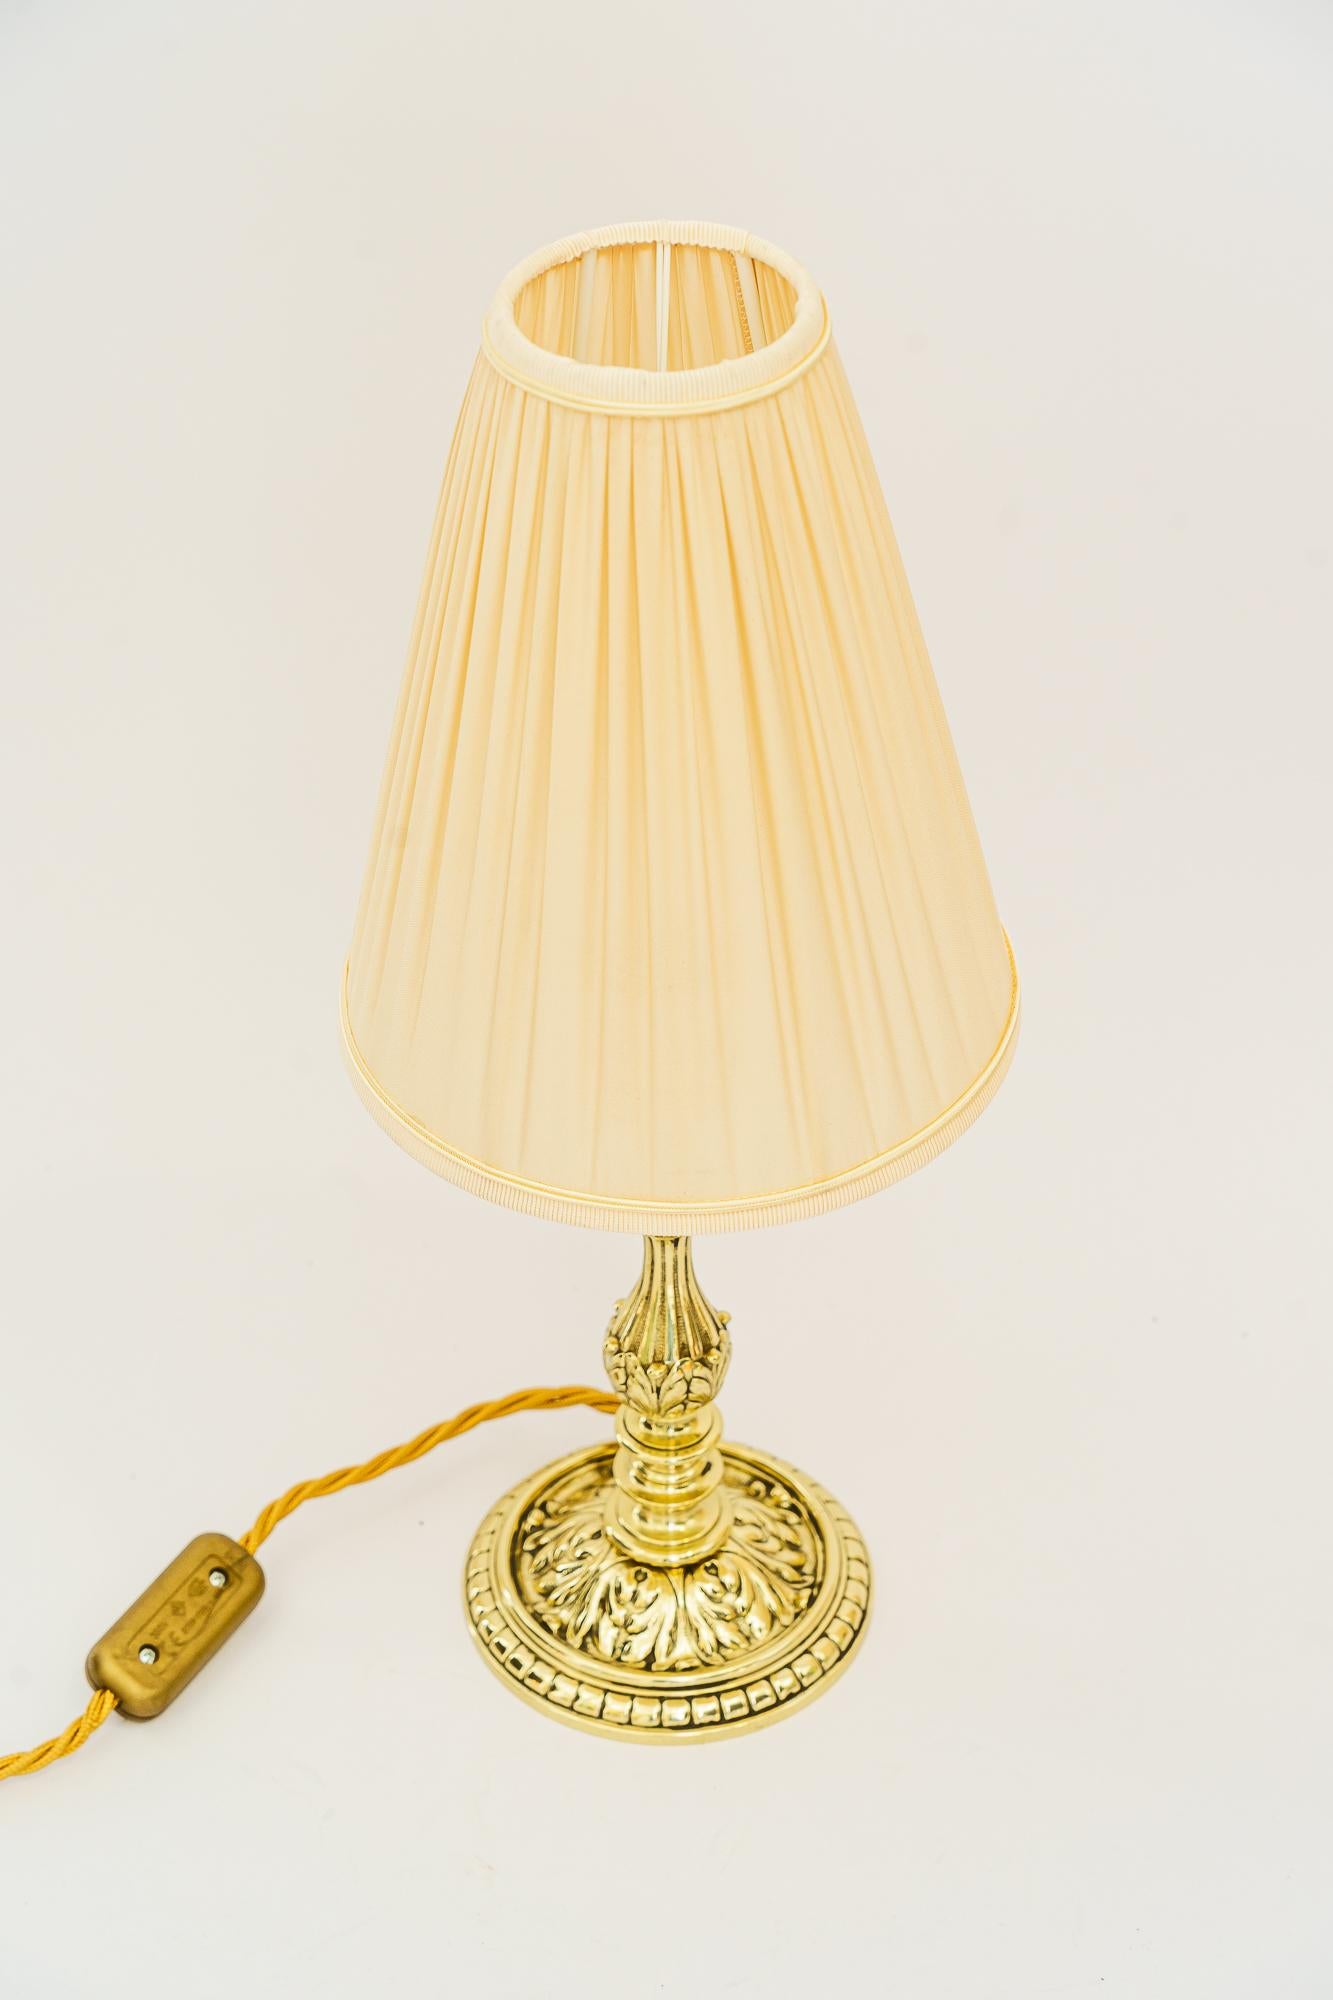 Historistic brass table lamp with fabric shade vienna around 1890s
Brass polished and stove enameled
The fabric is replaced ( new )